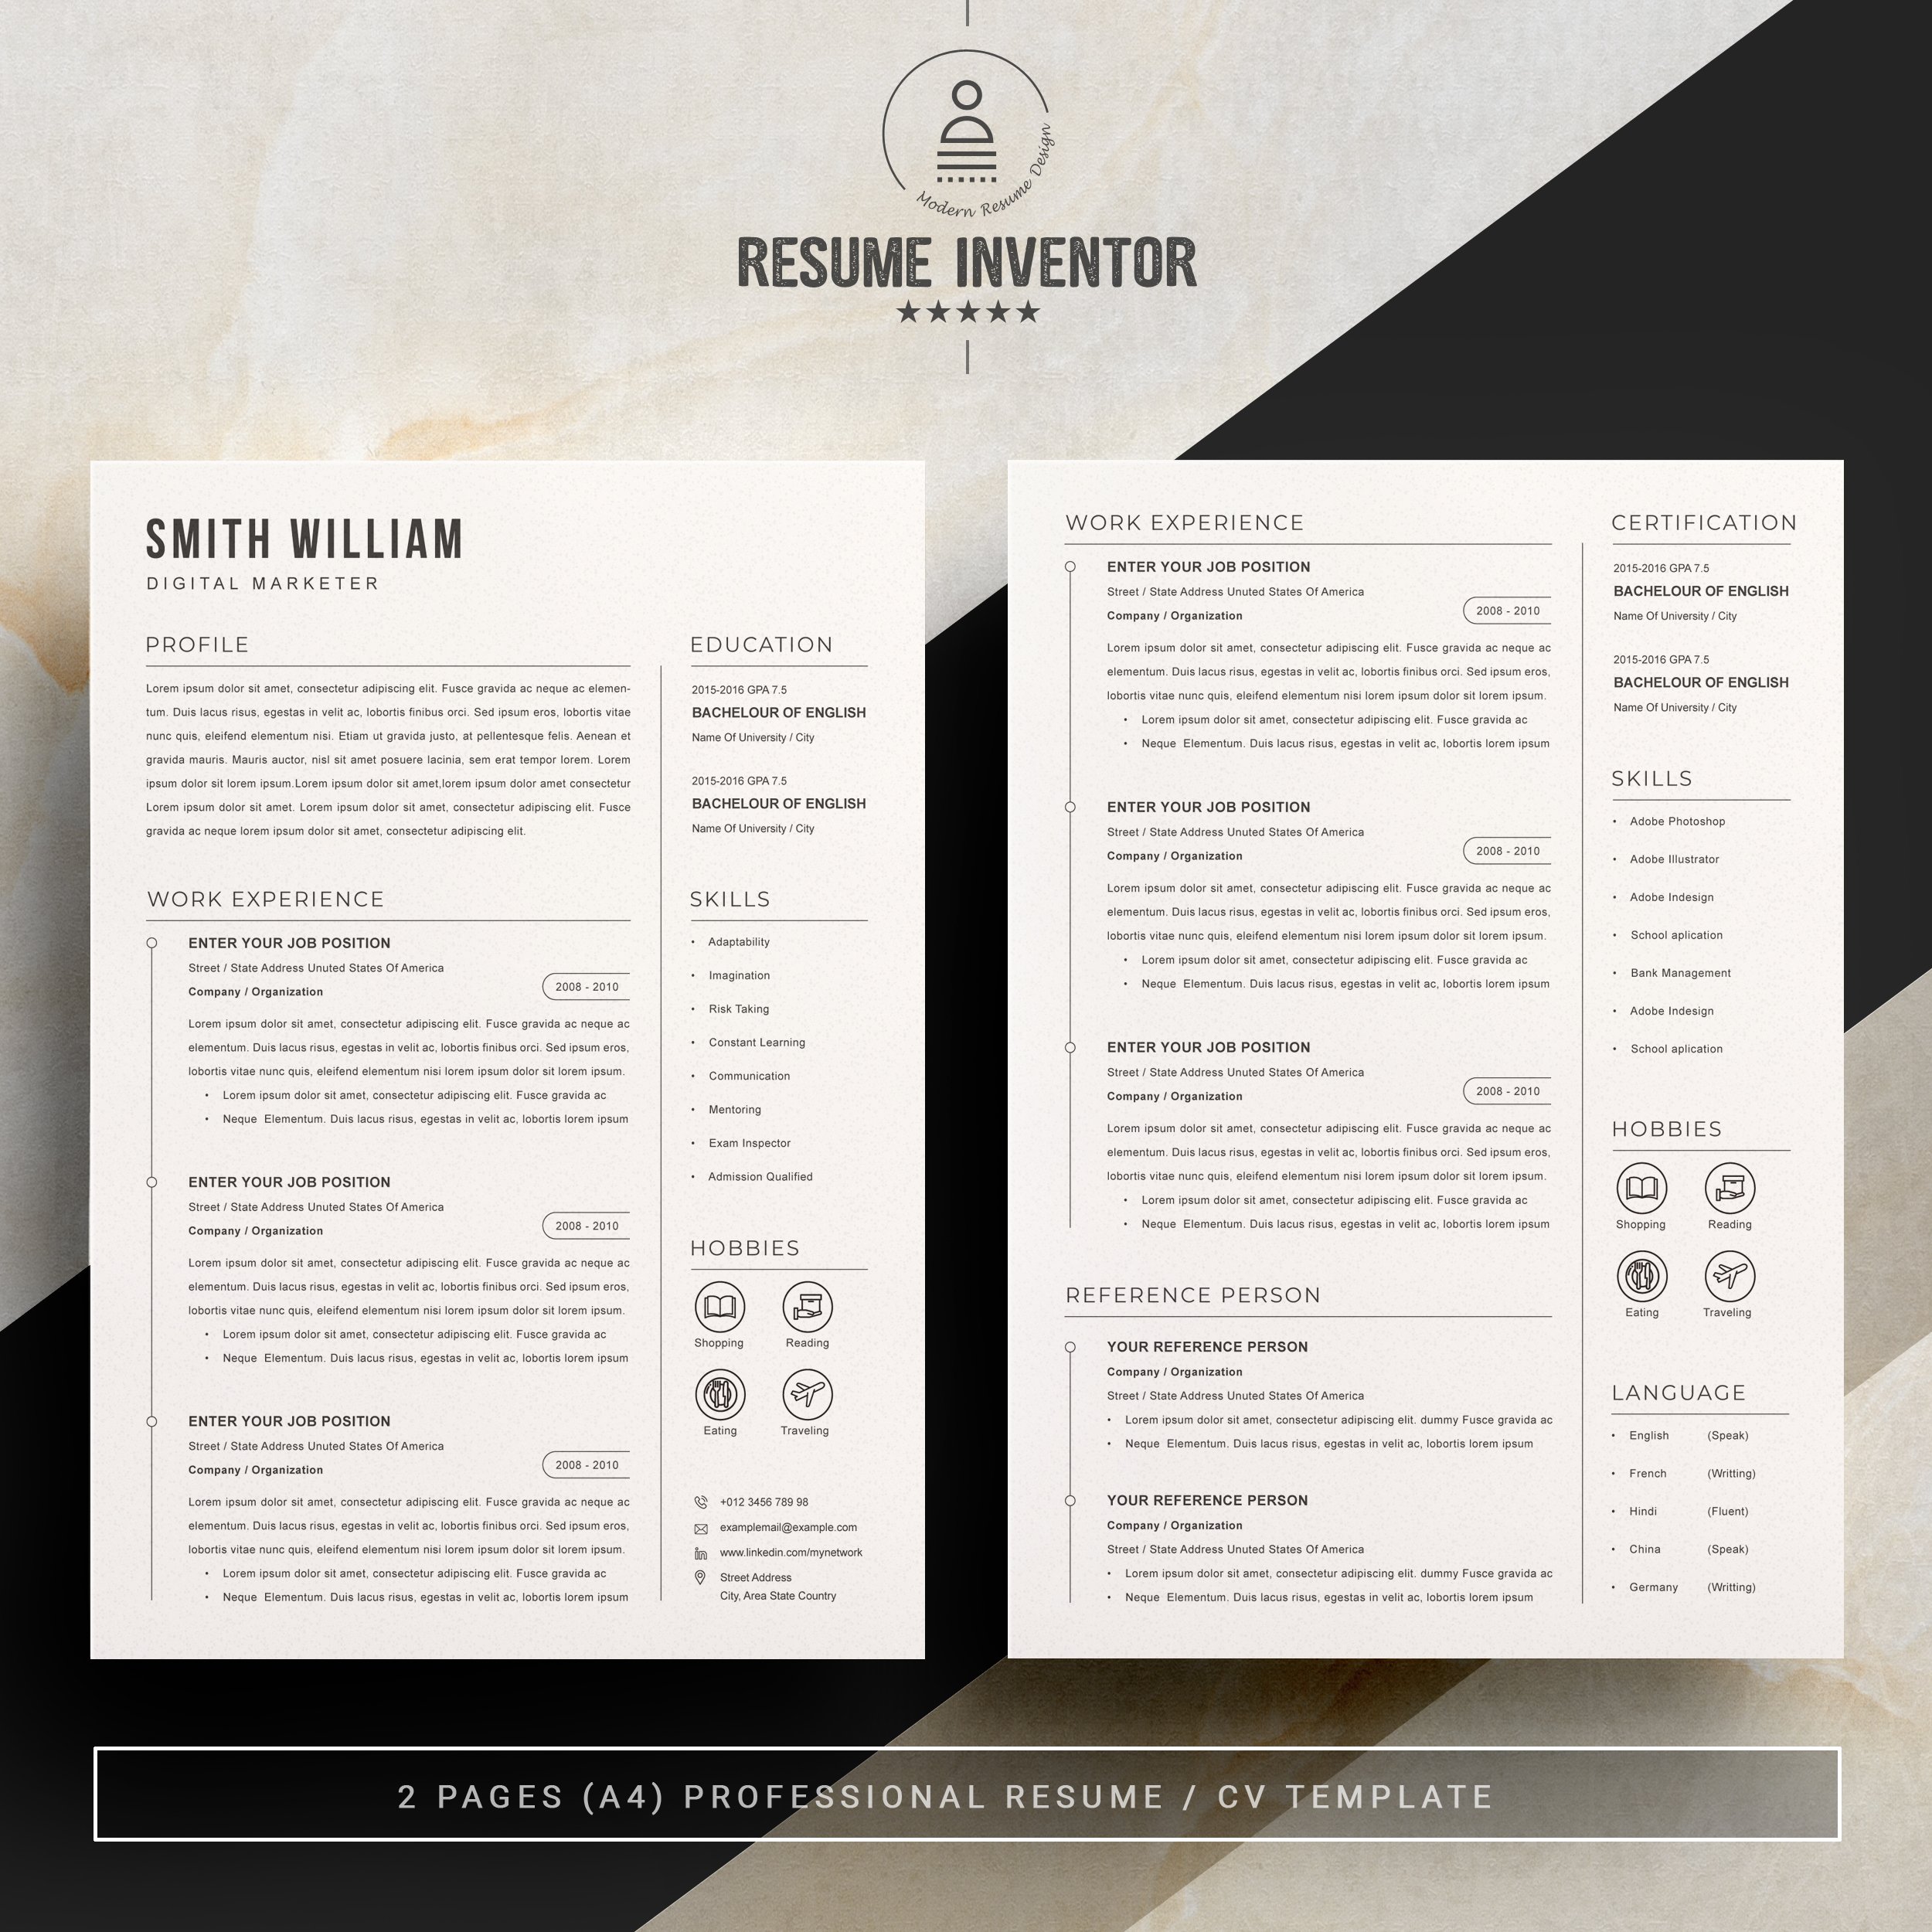 Clean Resume | Professional Resume preview image.